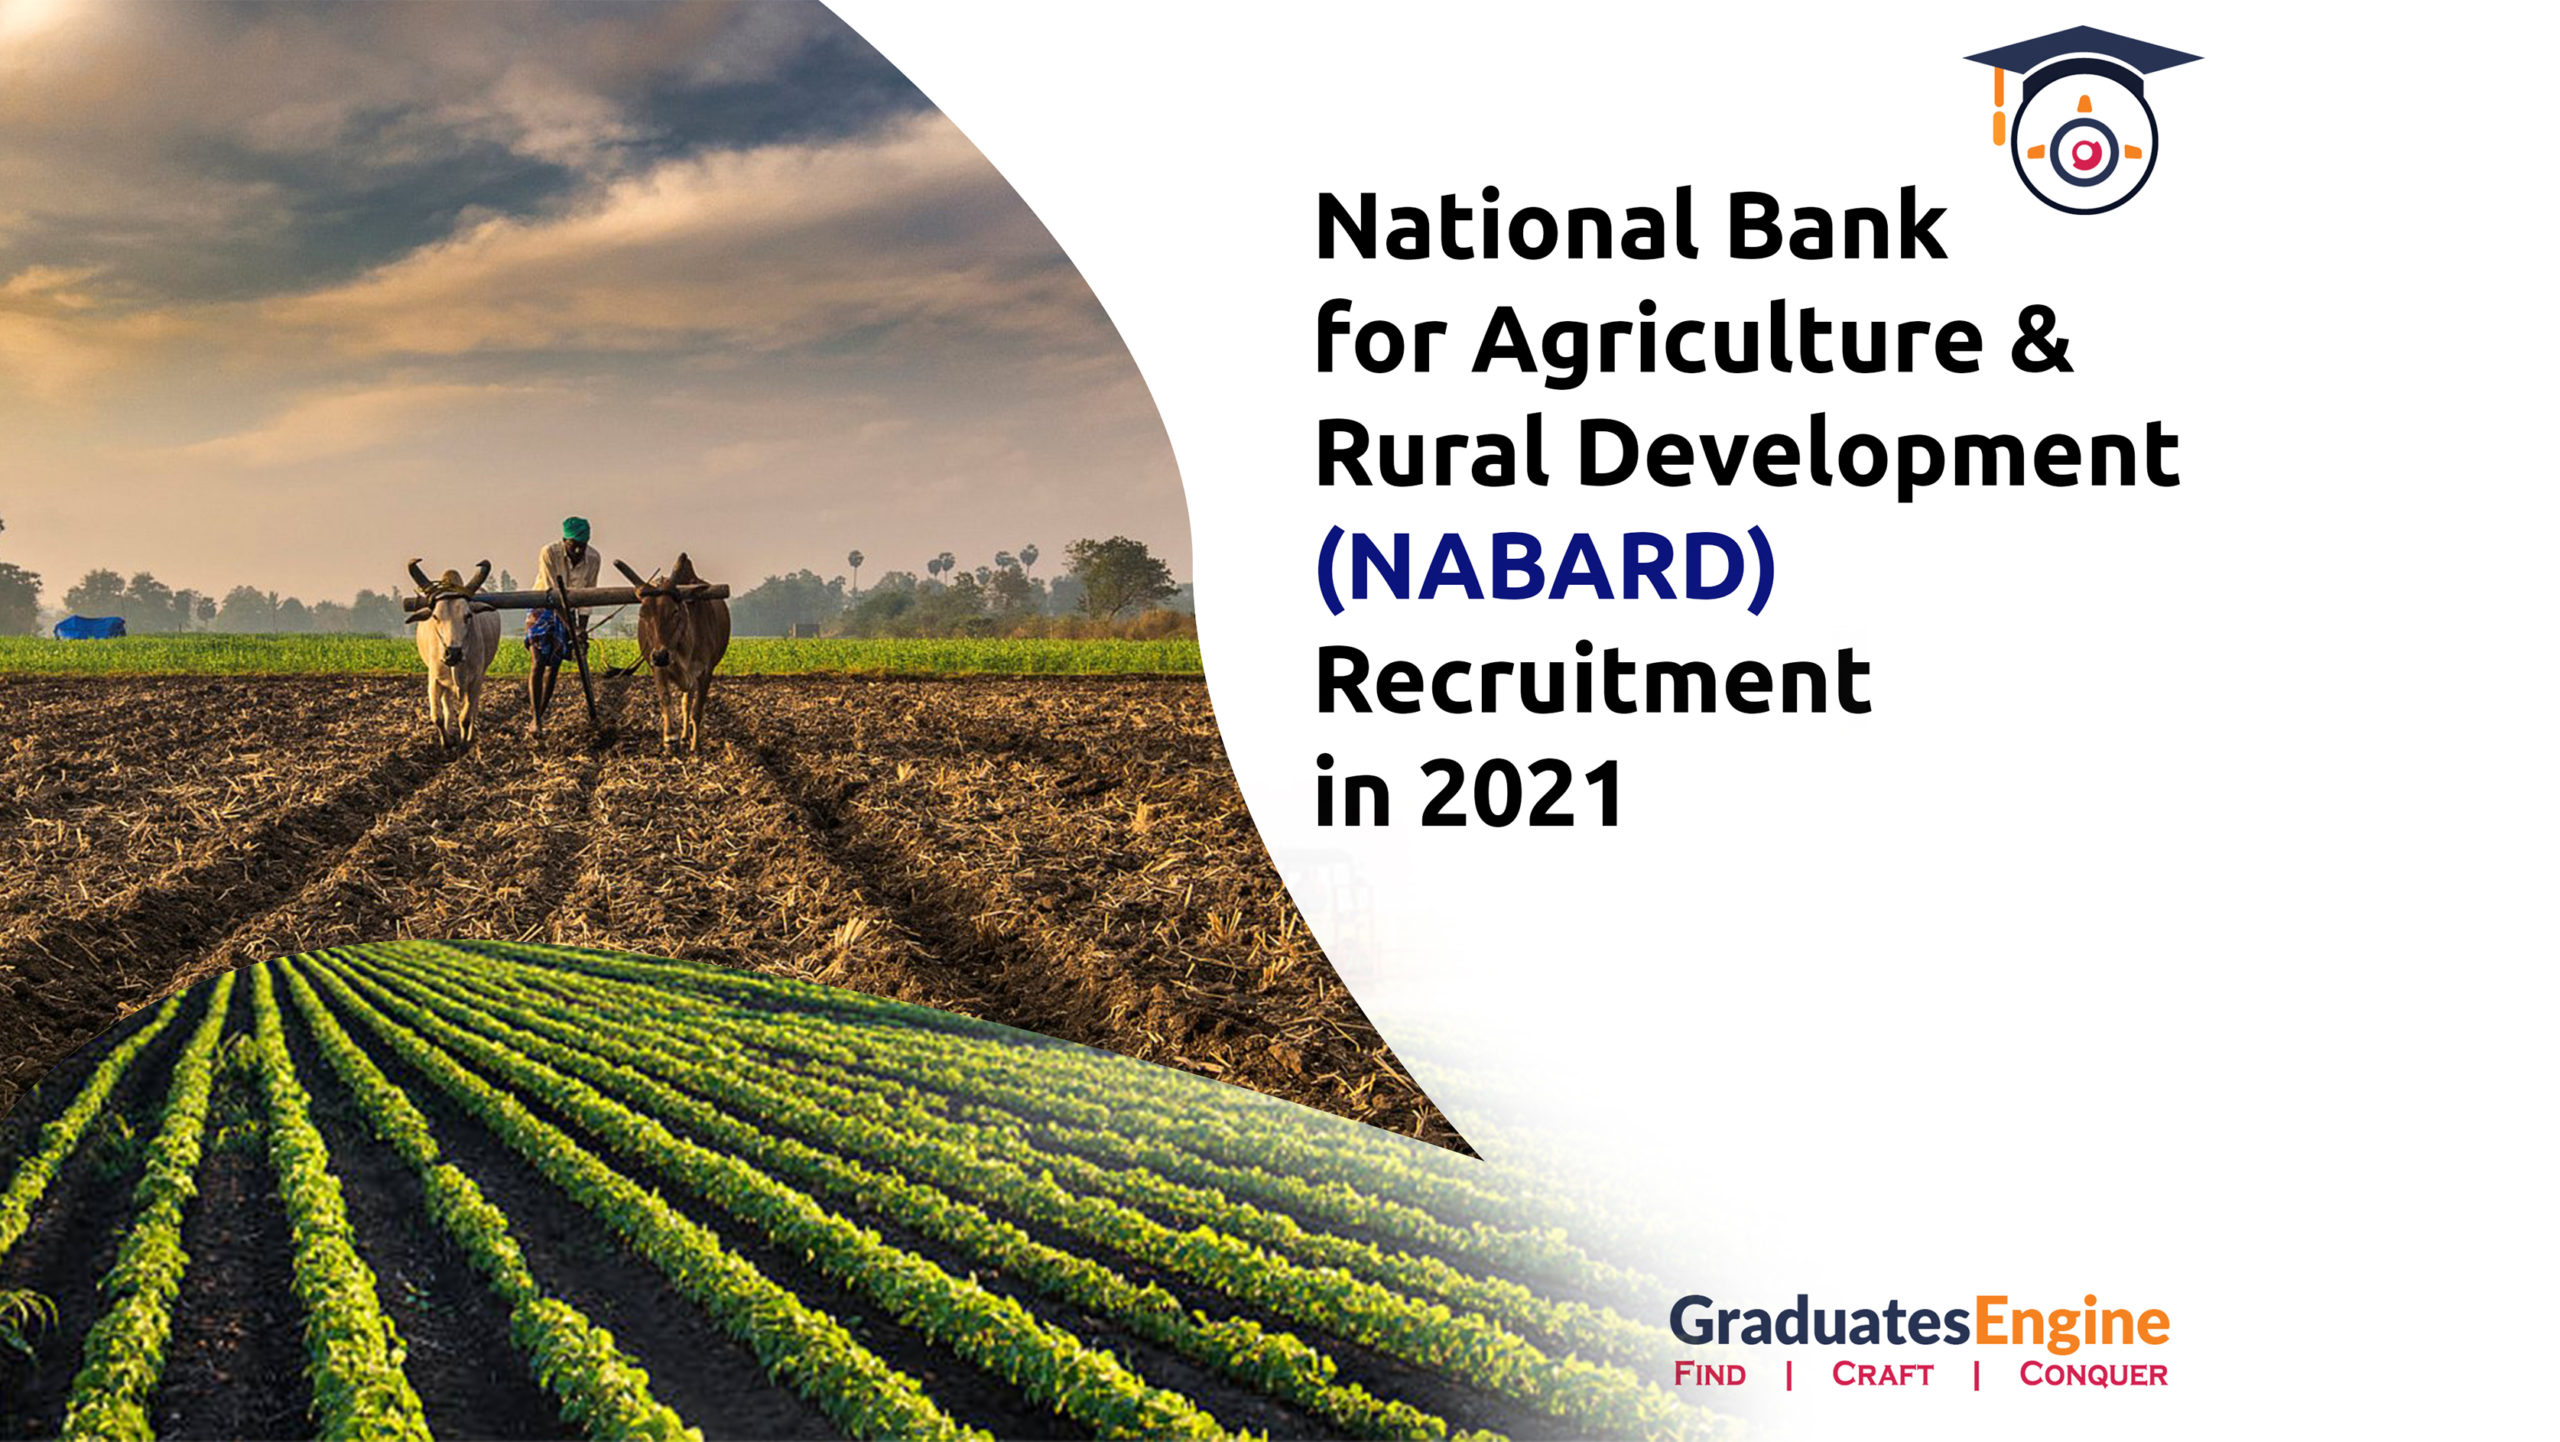 National Bank for Agriculture and Rural Development (NABARD) Recruitment in 2020-21